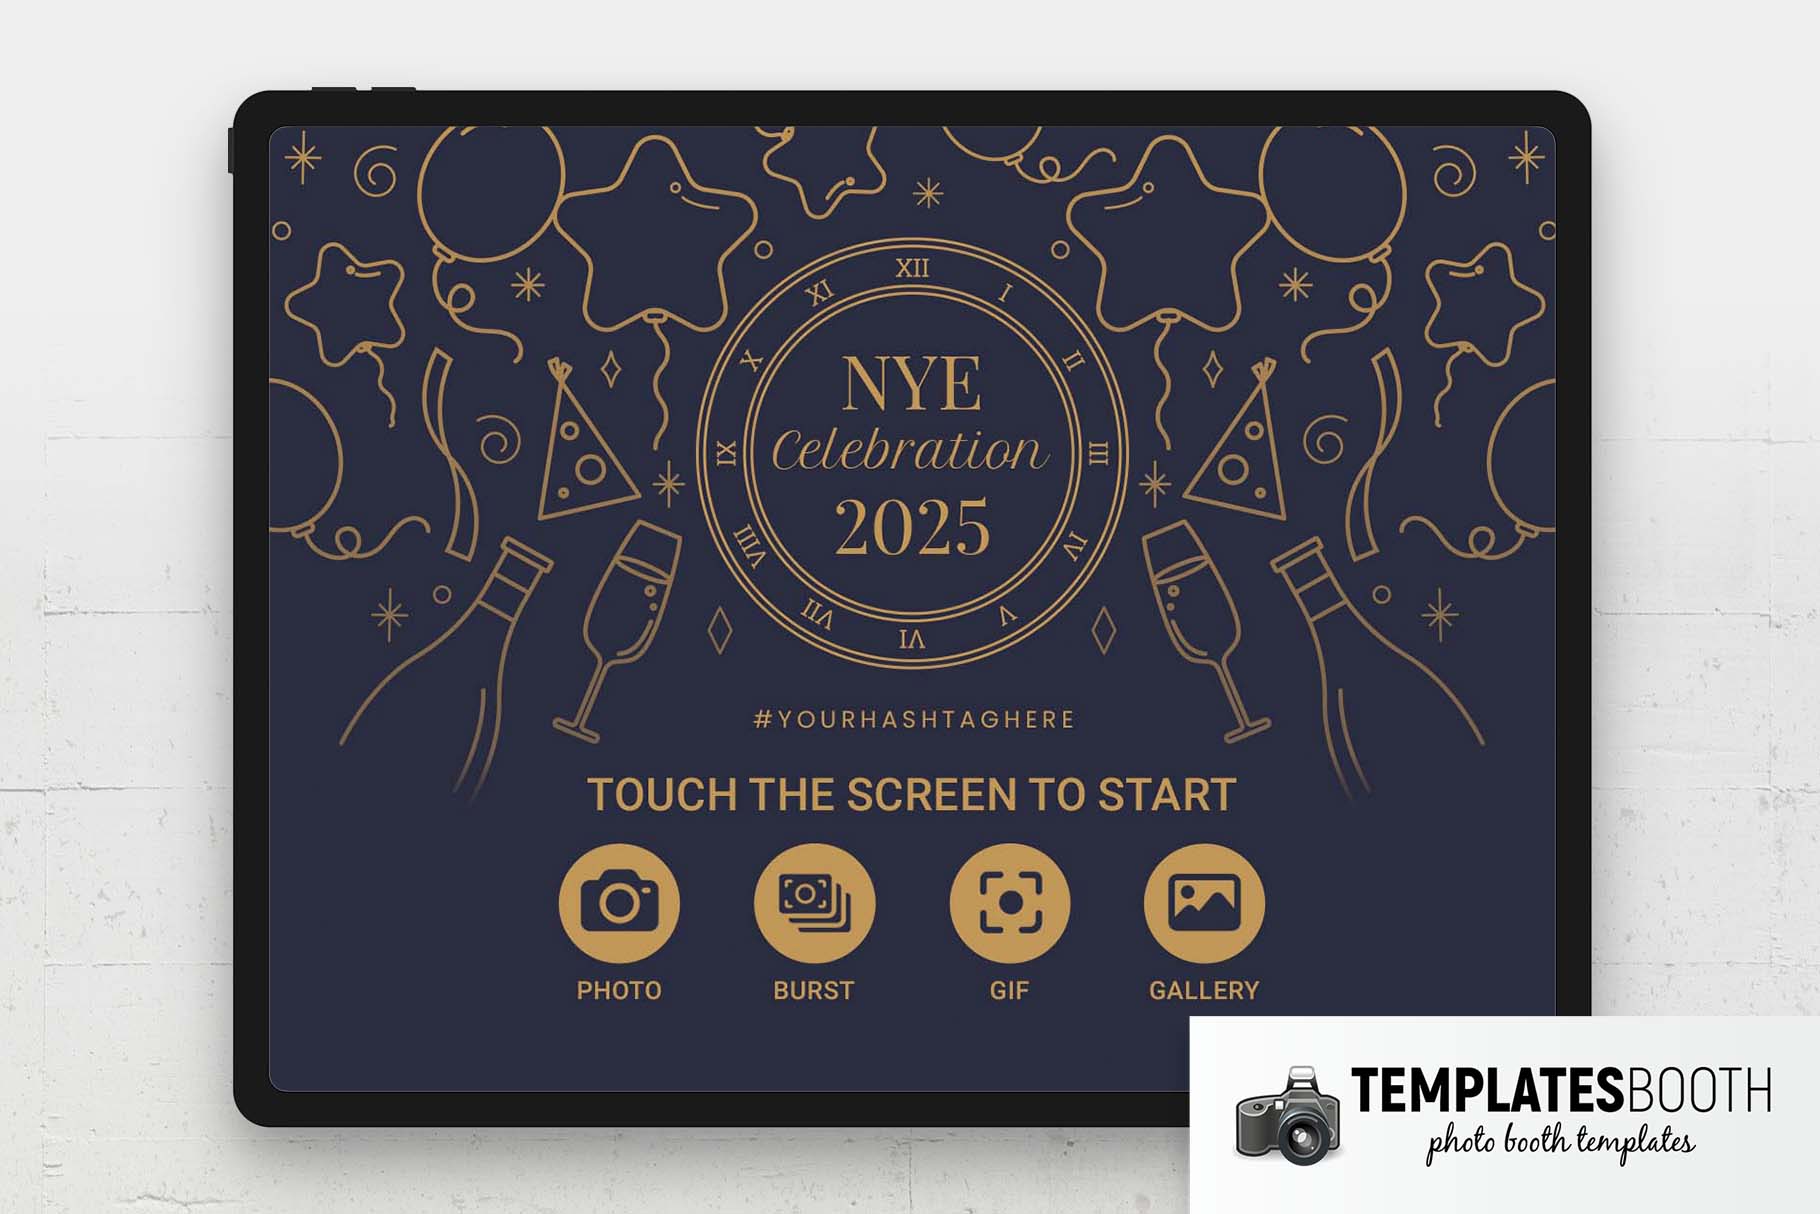 Ornate New Year's Eve Photo Booth Welcome Screen